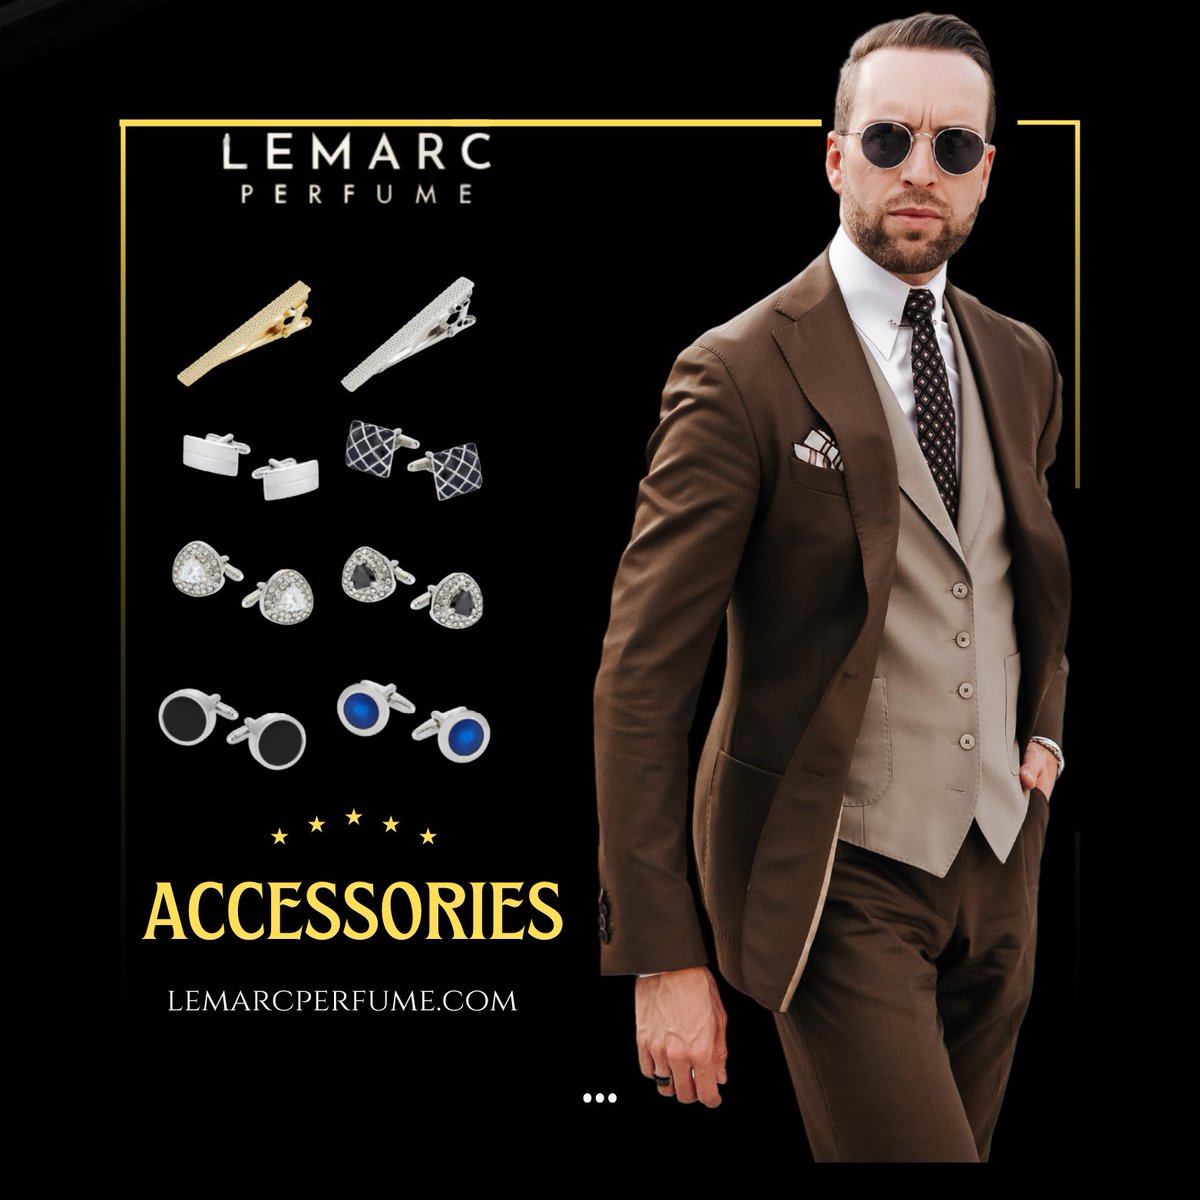 Enhance your wardrobe with high-quality accessories that will never go unnoticed. Choose yours at lemarcperfume.com
.
.
.
#mensfashion #menswear #influencerstyle #styleofmen #mensstyles #mensfashiontrends #ootdmen